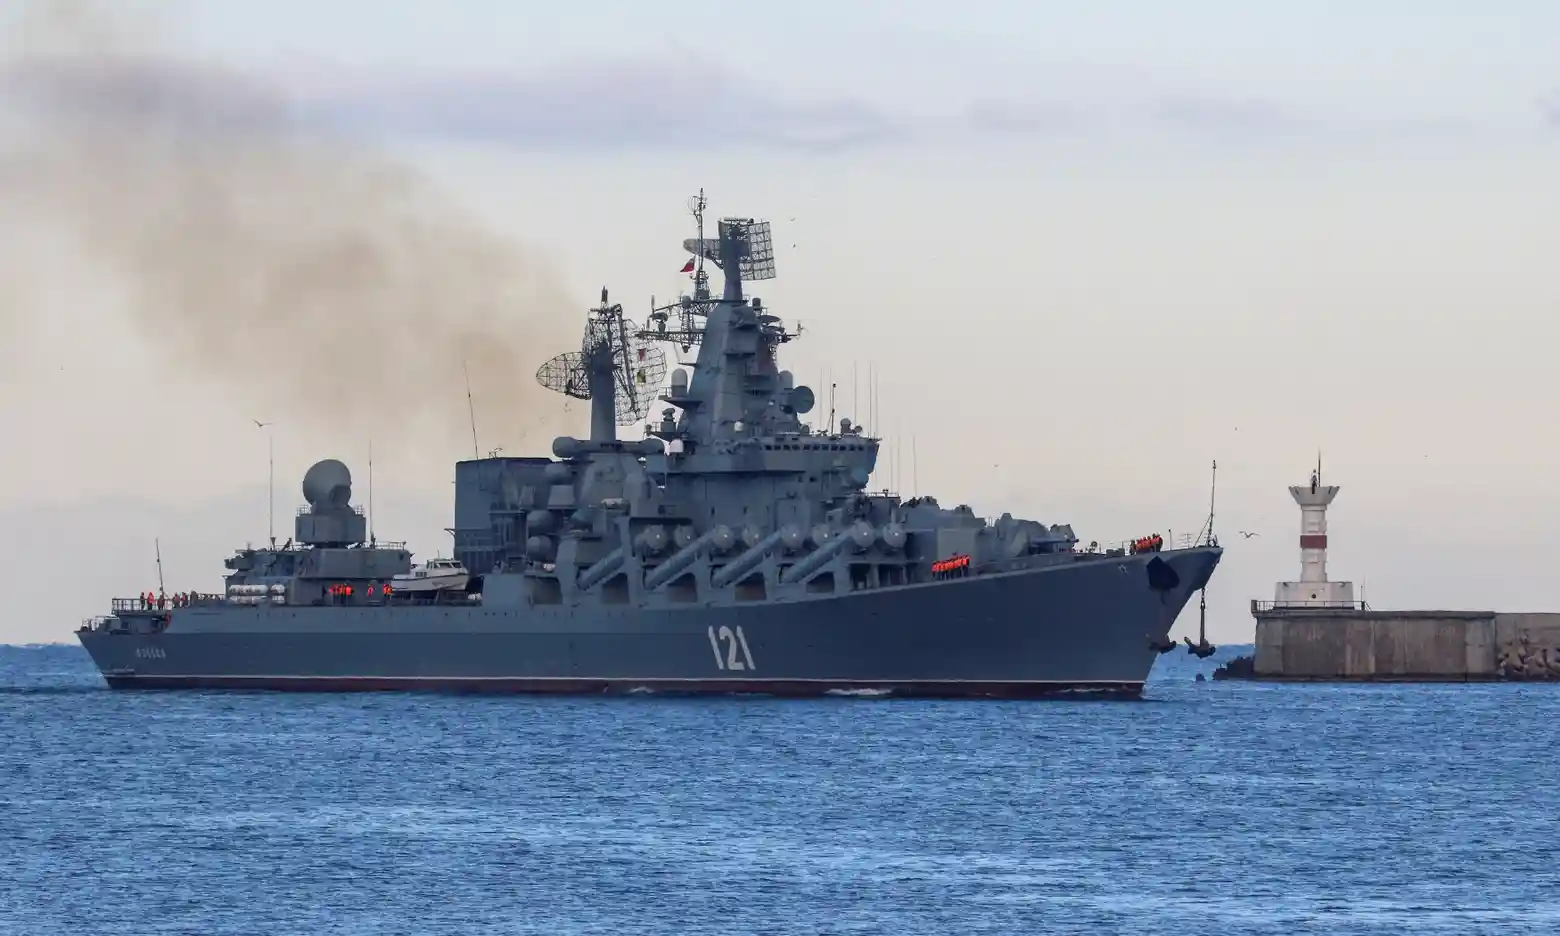 The Moskva, Russia’s flagship of the Black Sea fleet, was reportedly hit by two Ukrainian missiles late on Wednesday night,  Defense Express